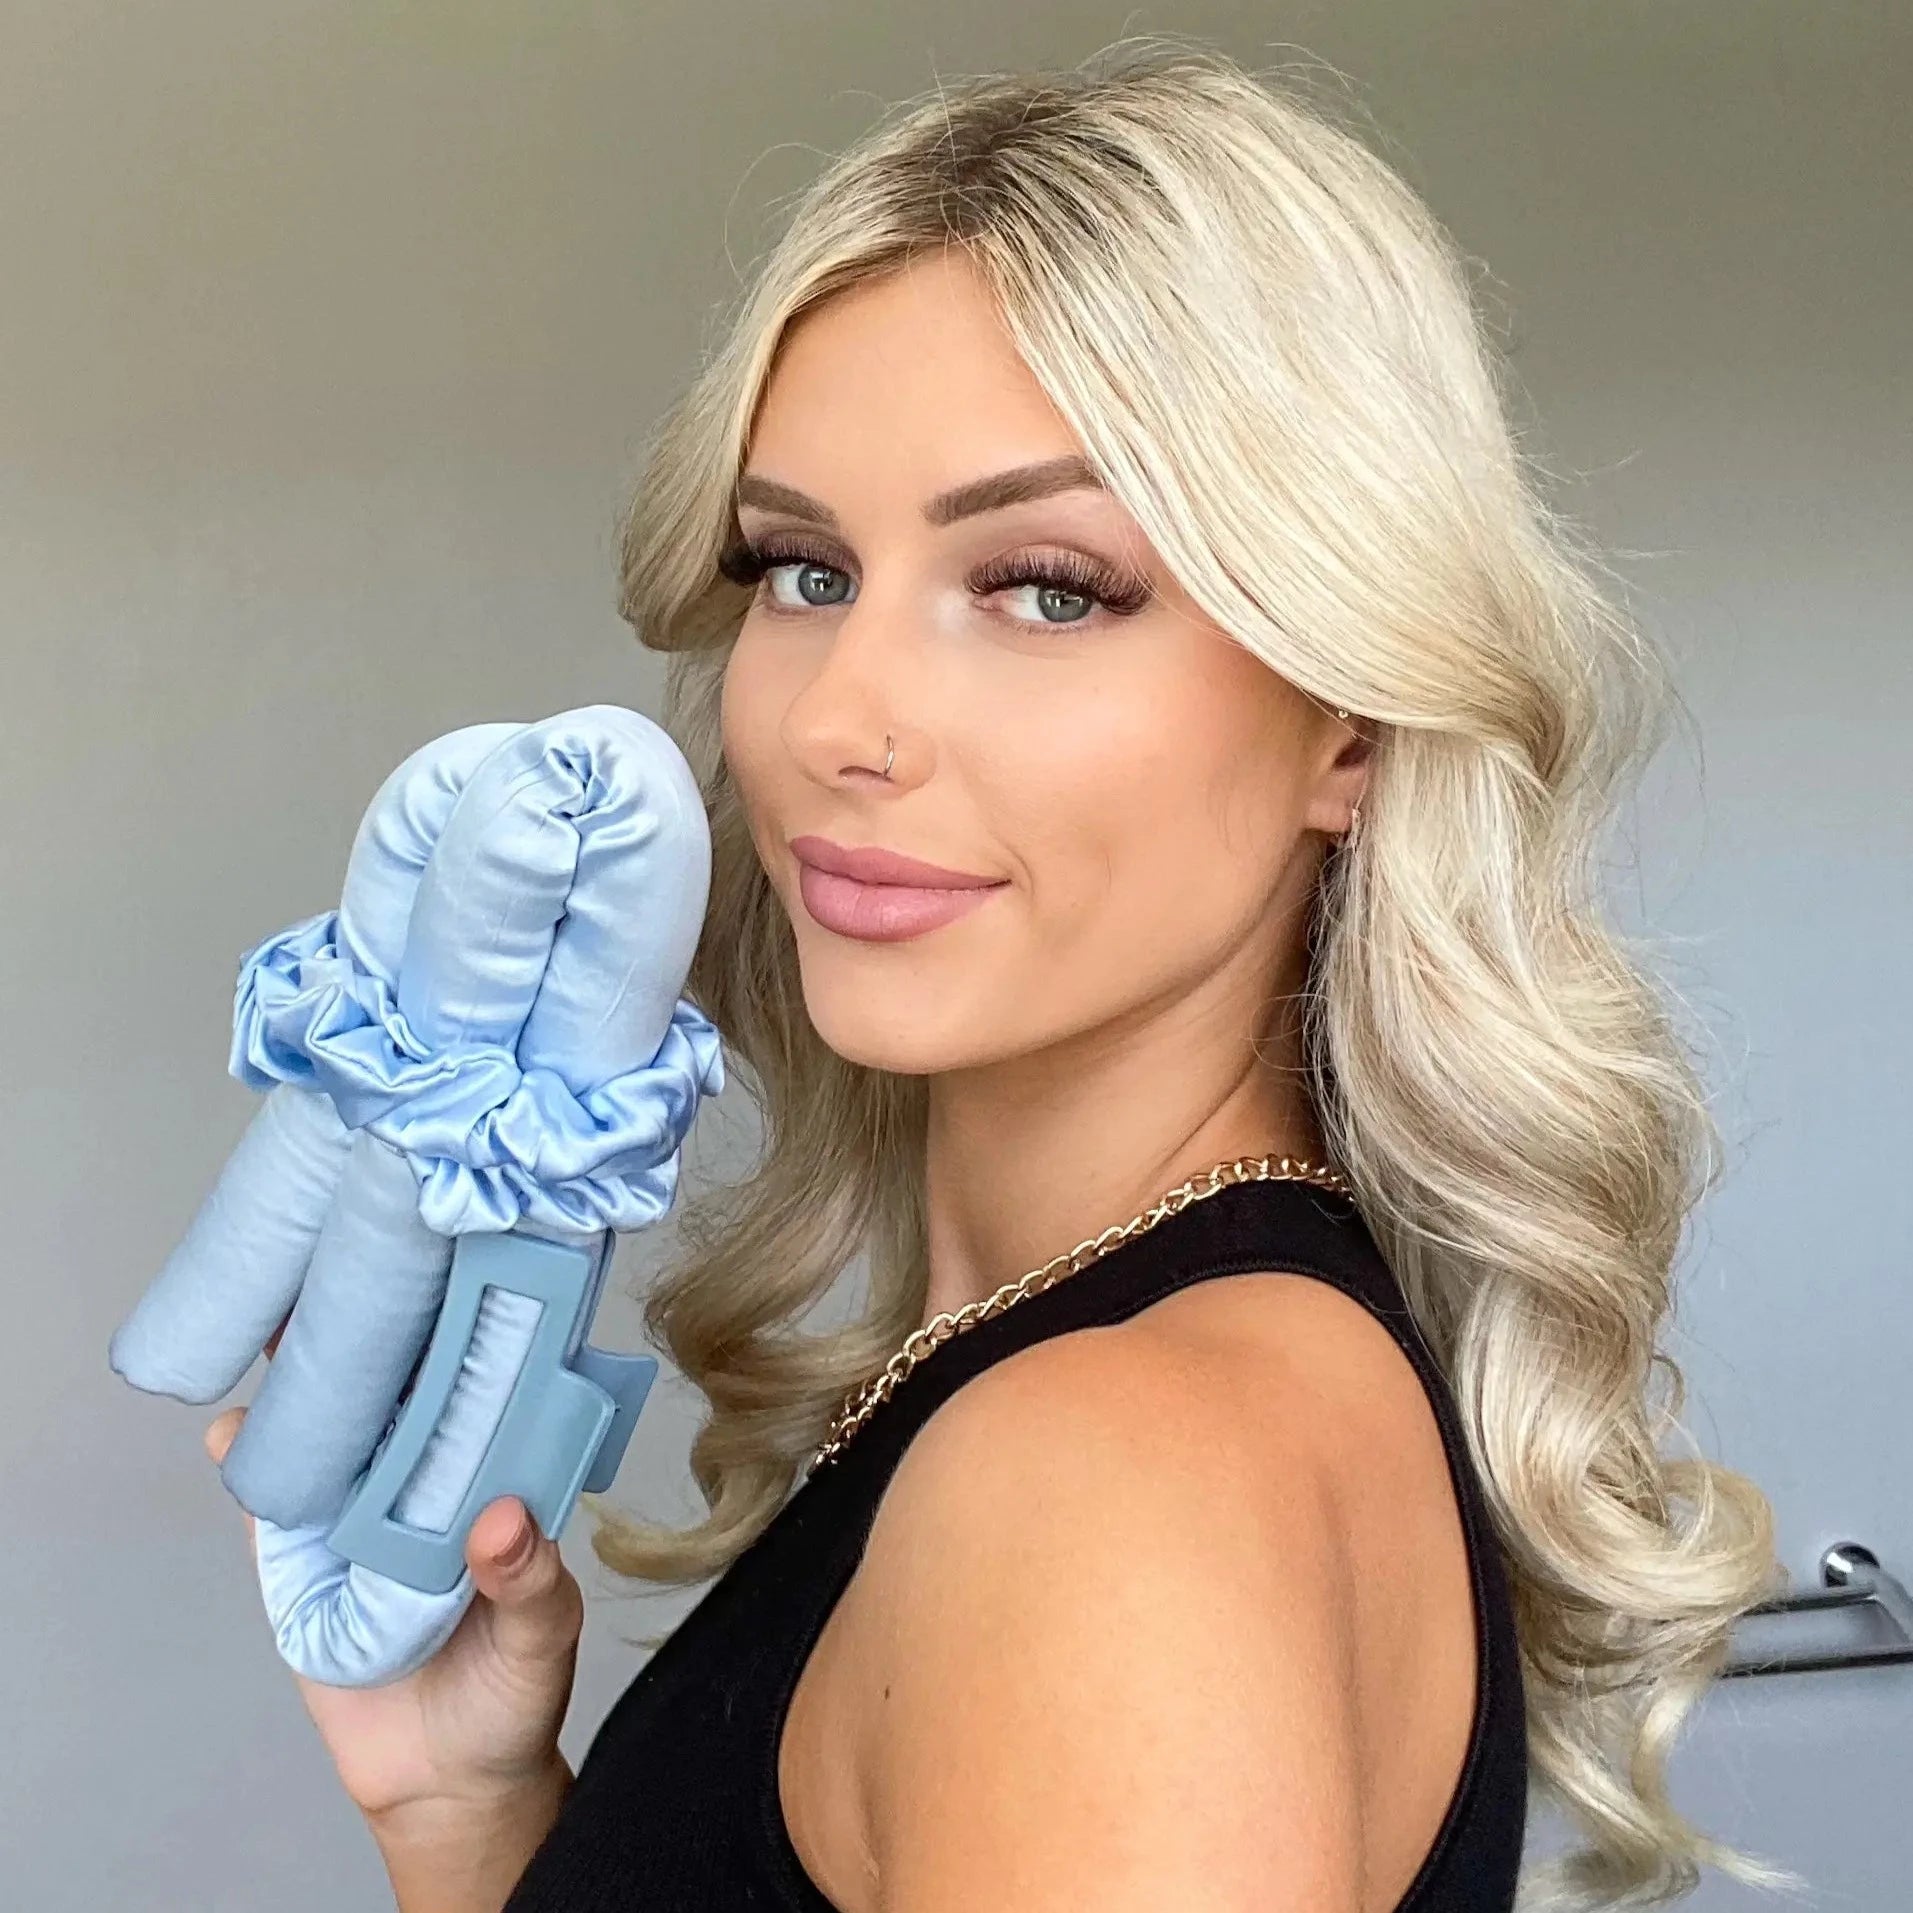 Woman with blonde curled hair holding heatless curler in blue